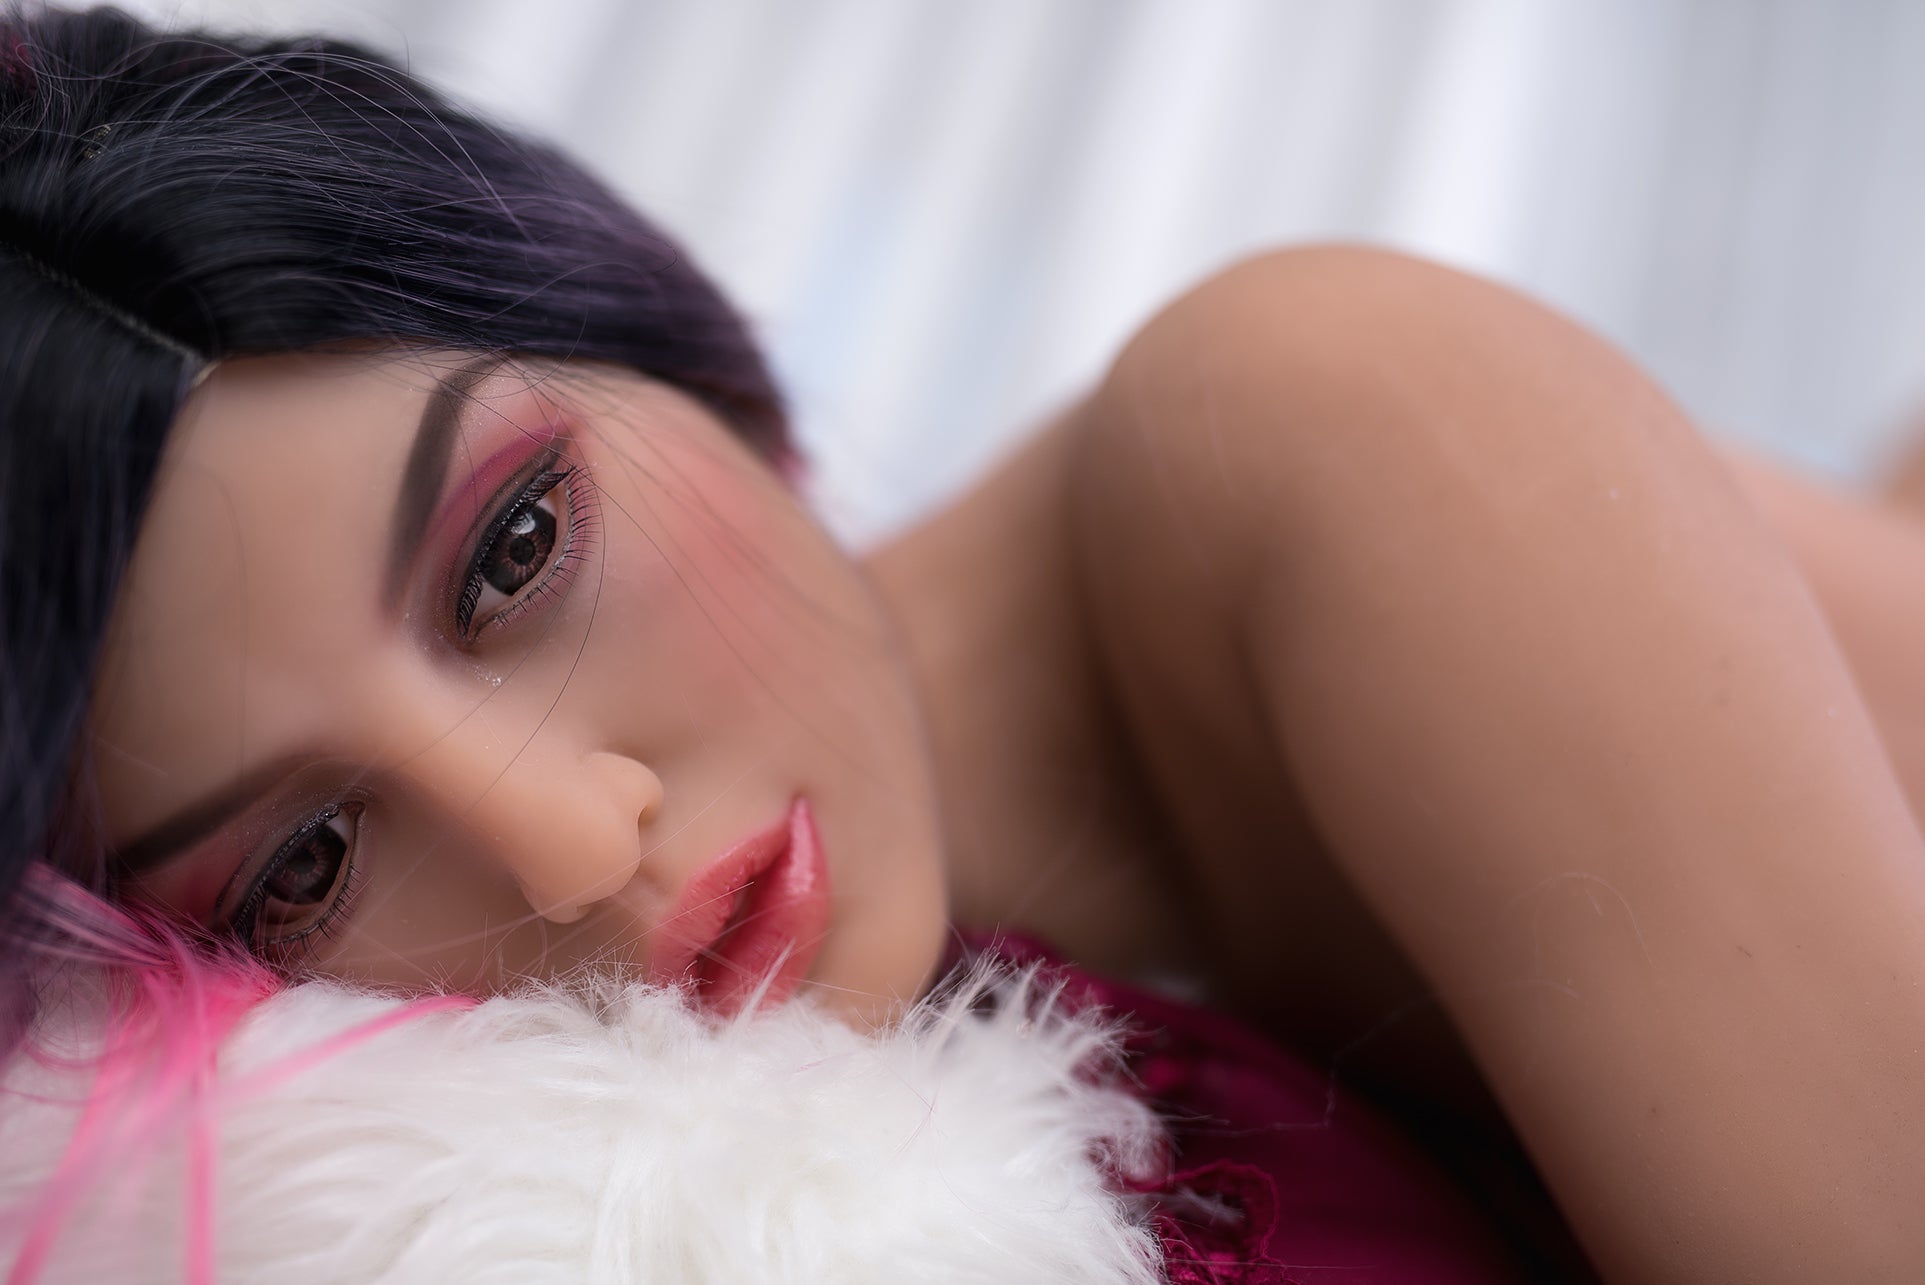 6YE Doll 160 cm TPE - #33 (USA) | Buy Sex Dolls at DOLLS ACTUALLY